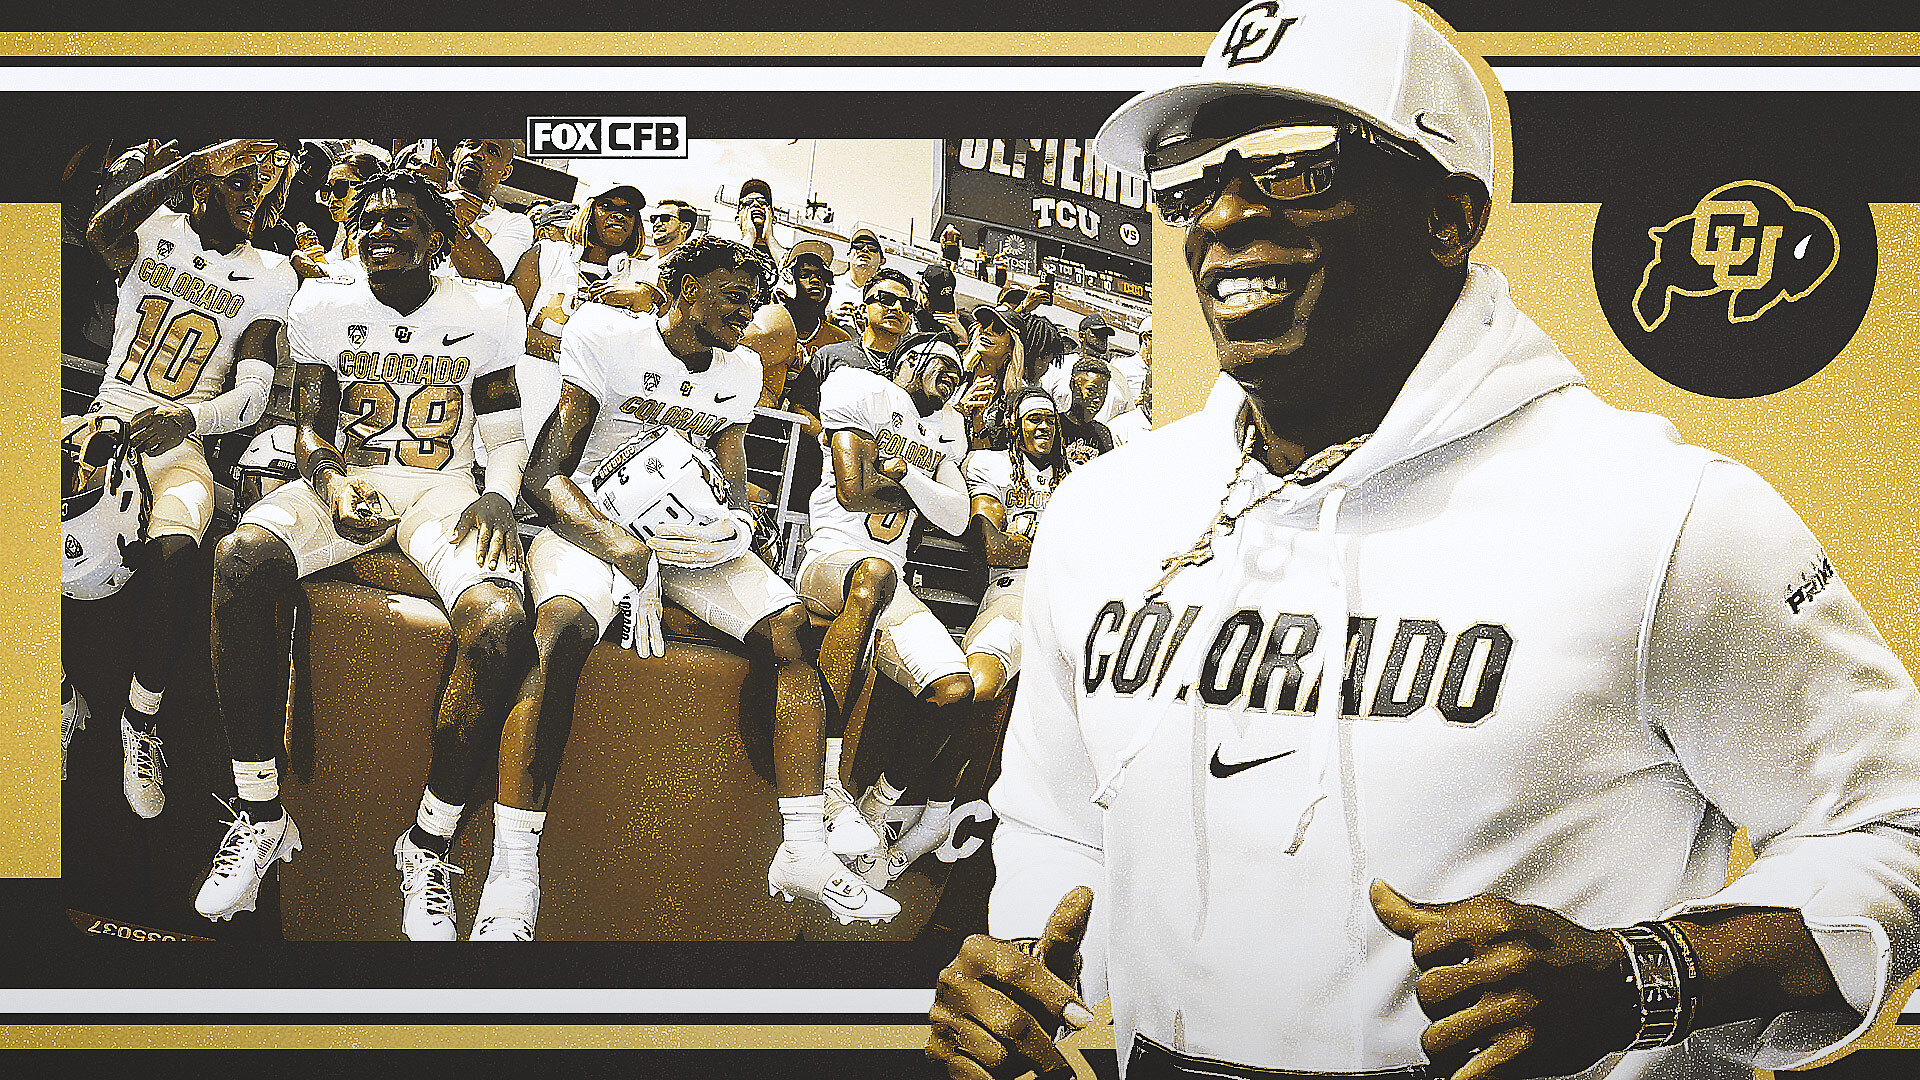 Deion Sanders' contagious swagger has Colorado players believing they can be great